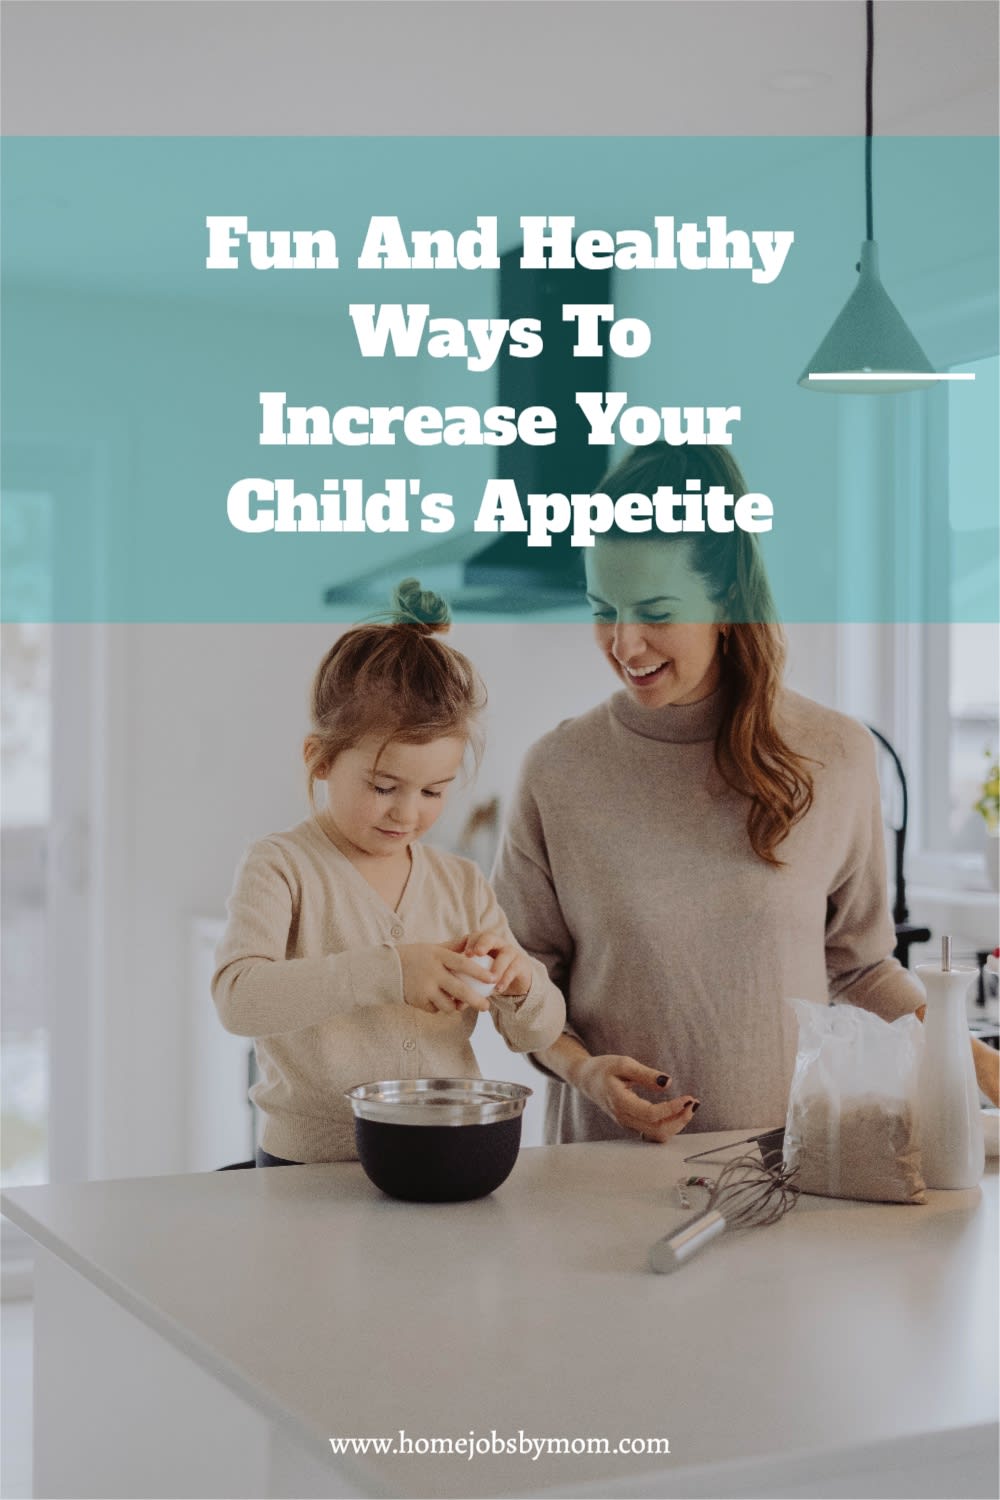 Fun And Healthy Ways To Increase Your Child's Appetite